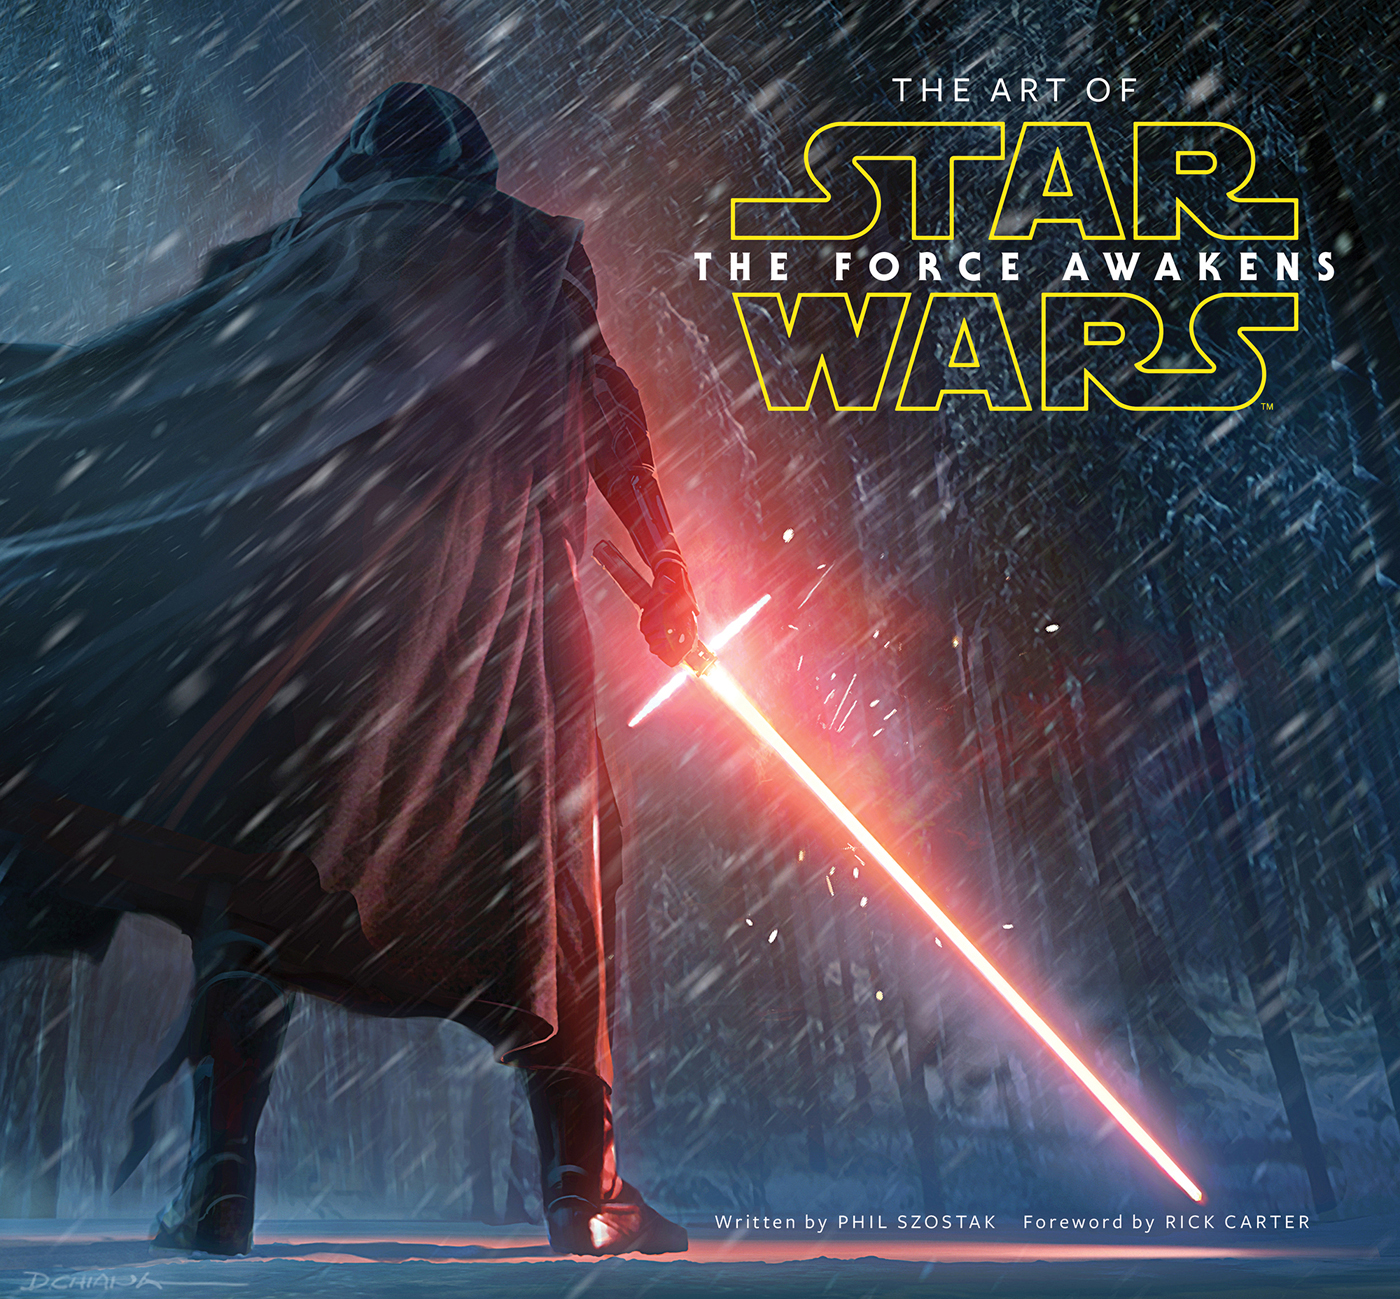 The Art of Star Wars : The Force Awakens